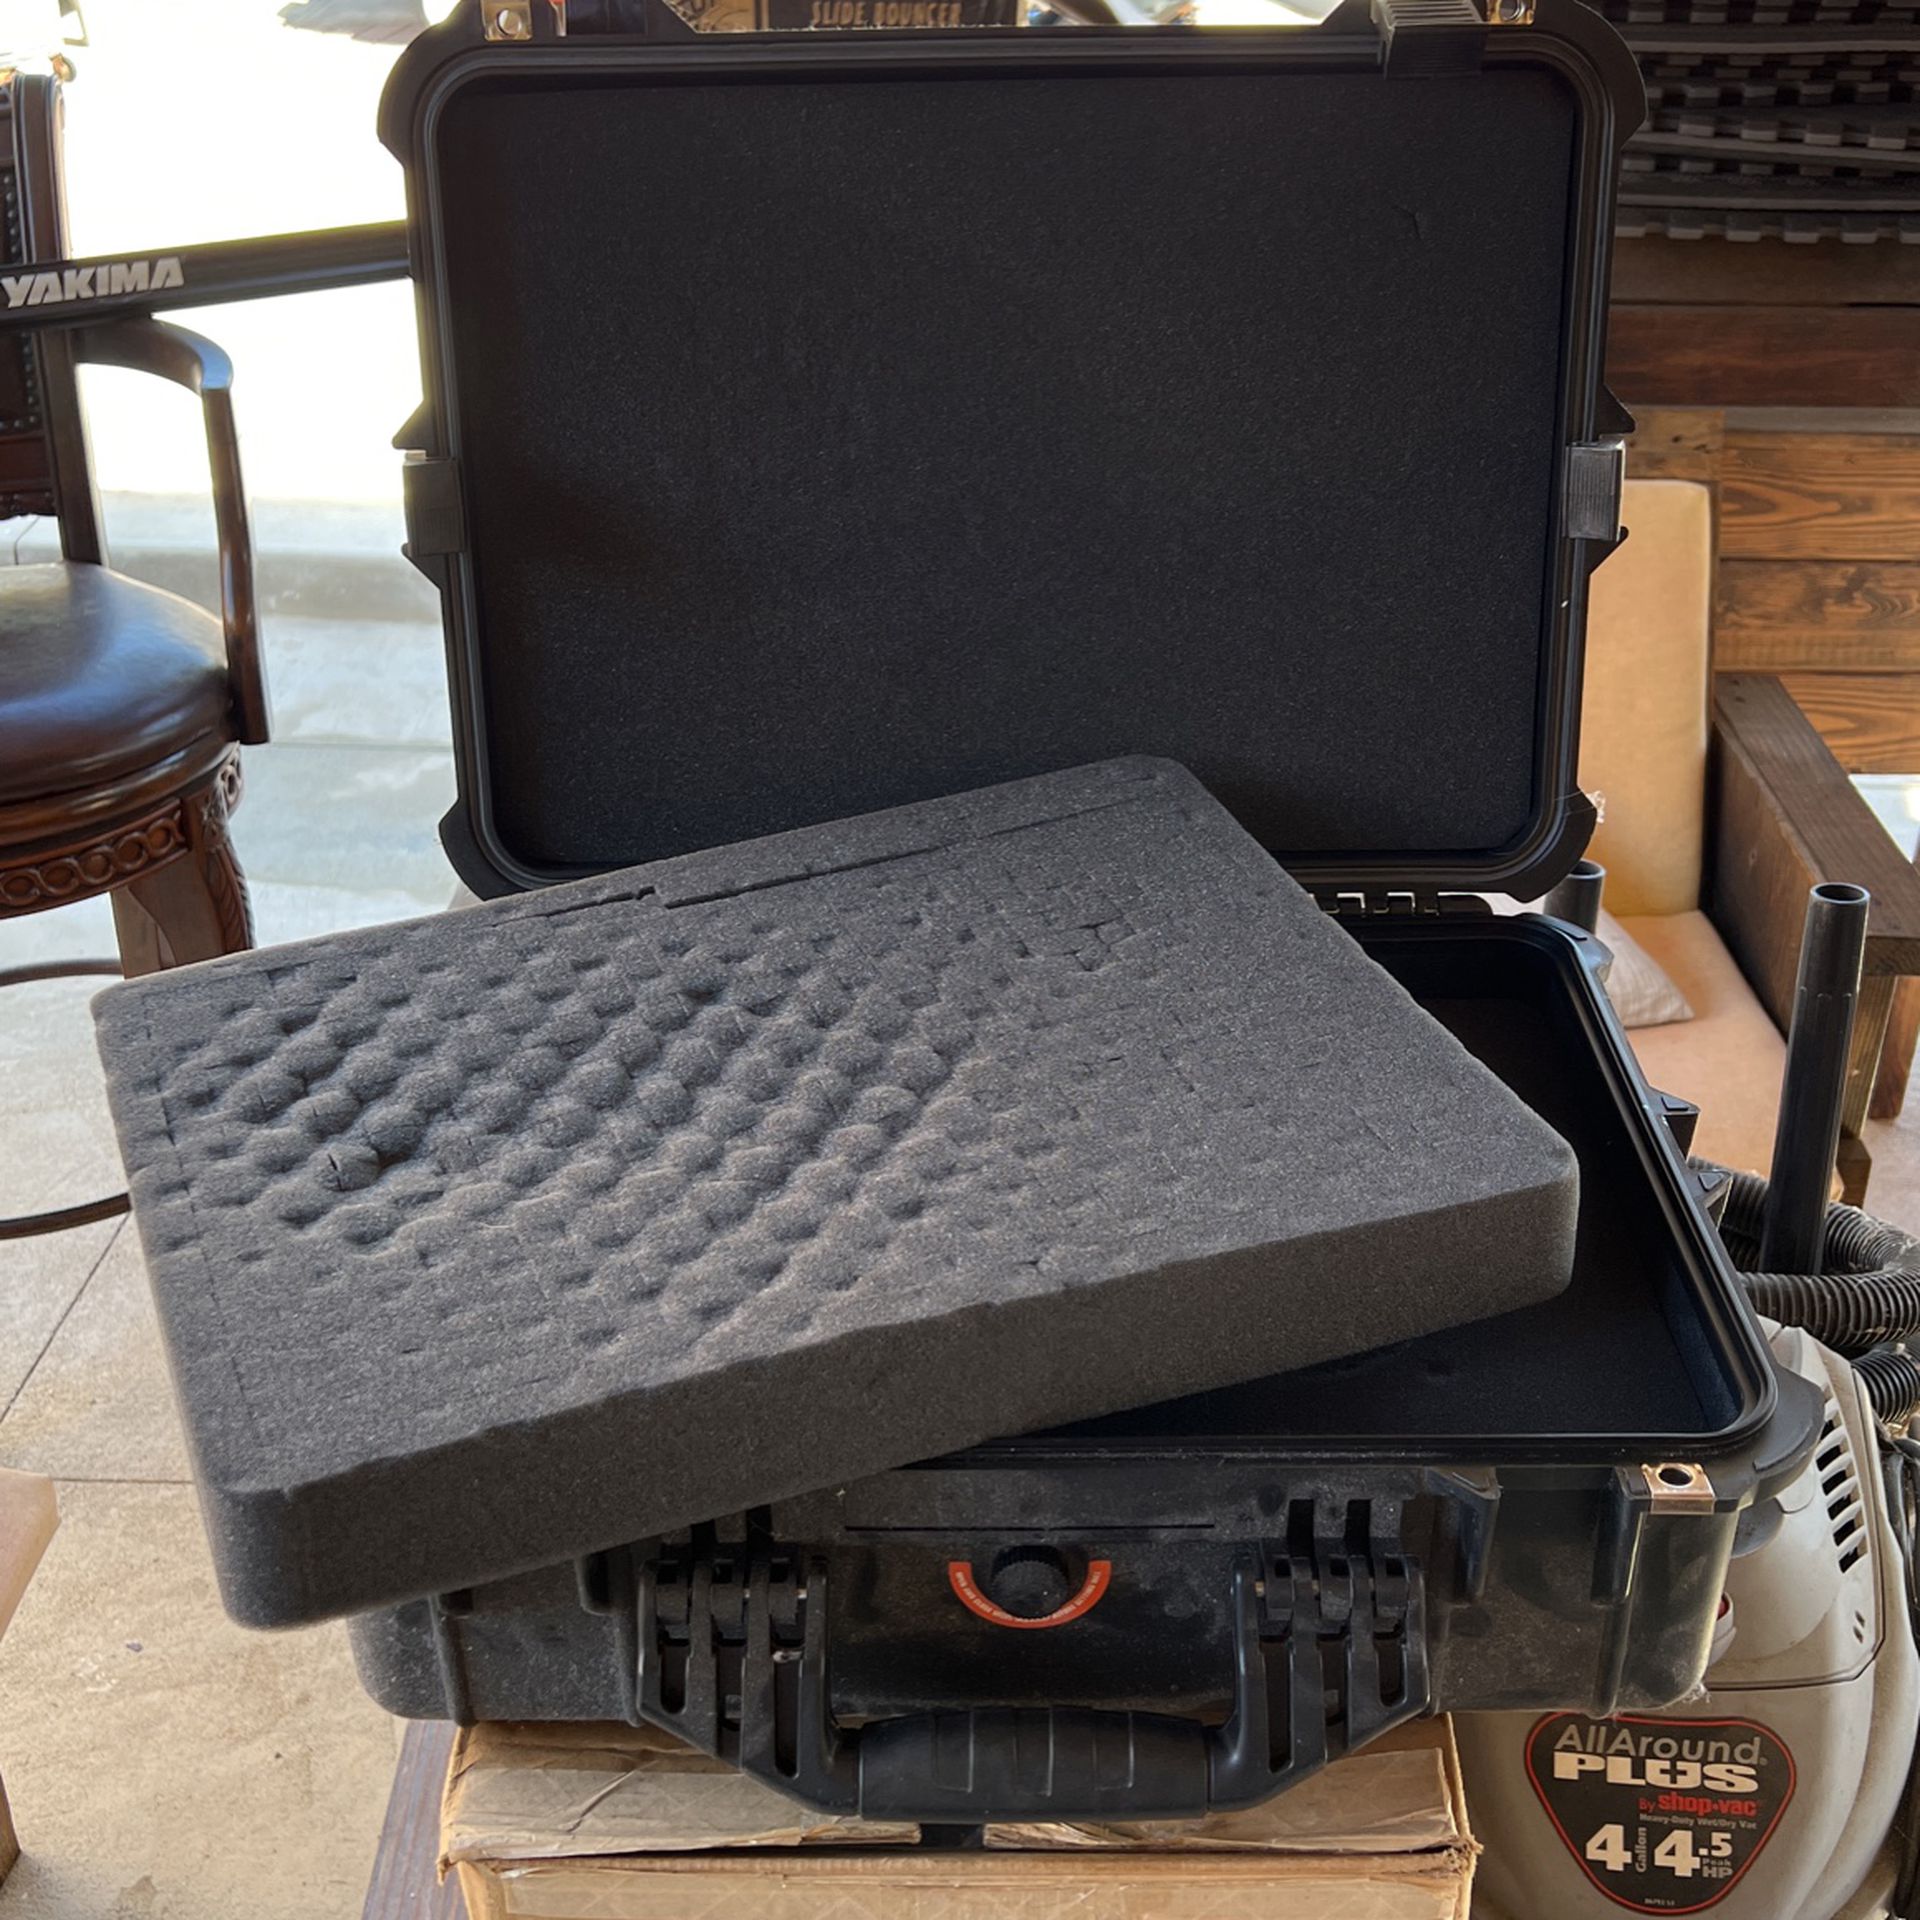 Apache 4800 Case 40.00 for Sale in San Diego, CA - OfferUp